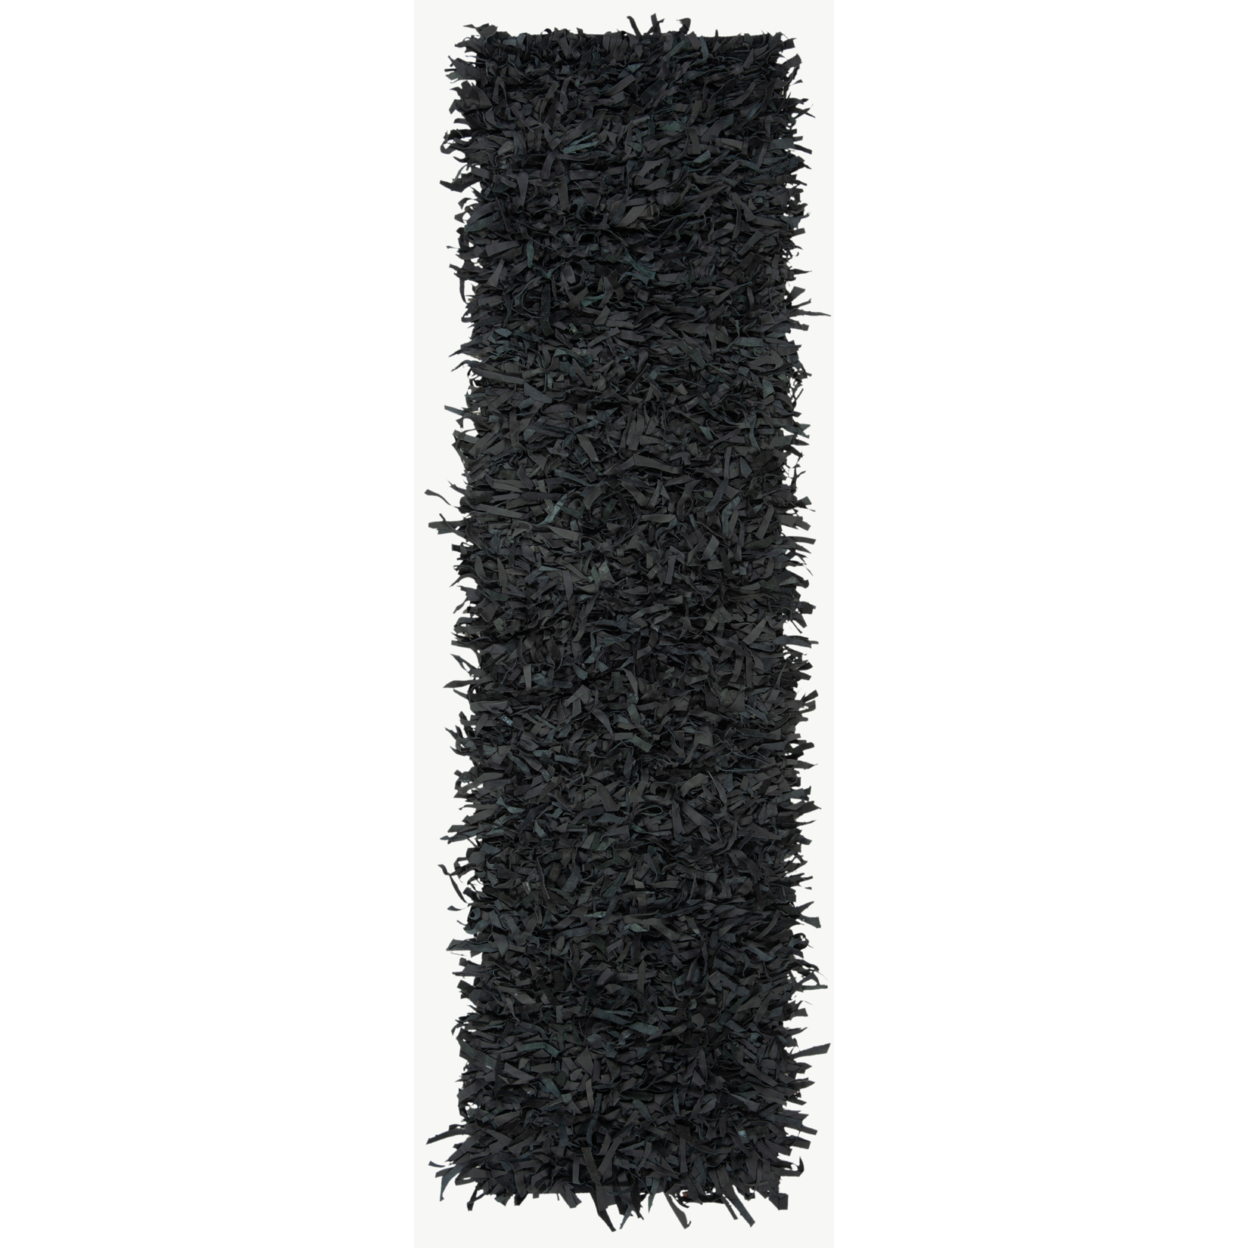 SAFAVIEH Leather Shag LSG601A Hand-knotted Black Rug - 5' Square